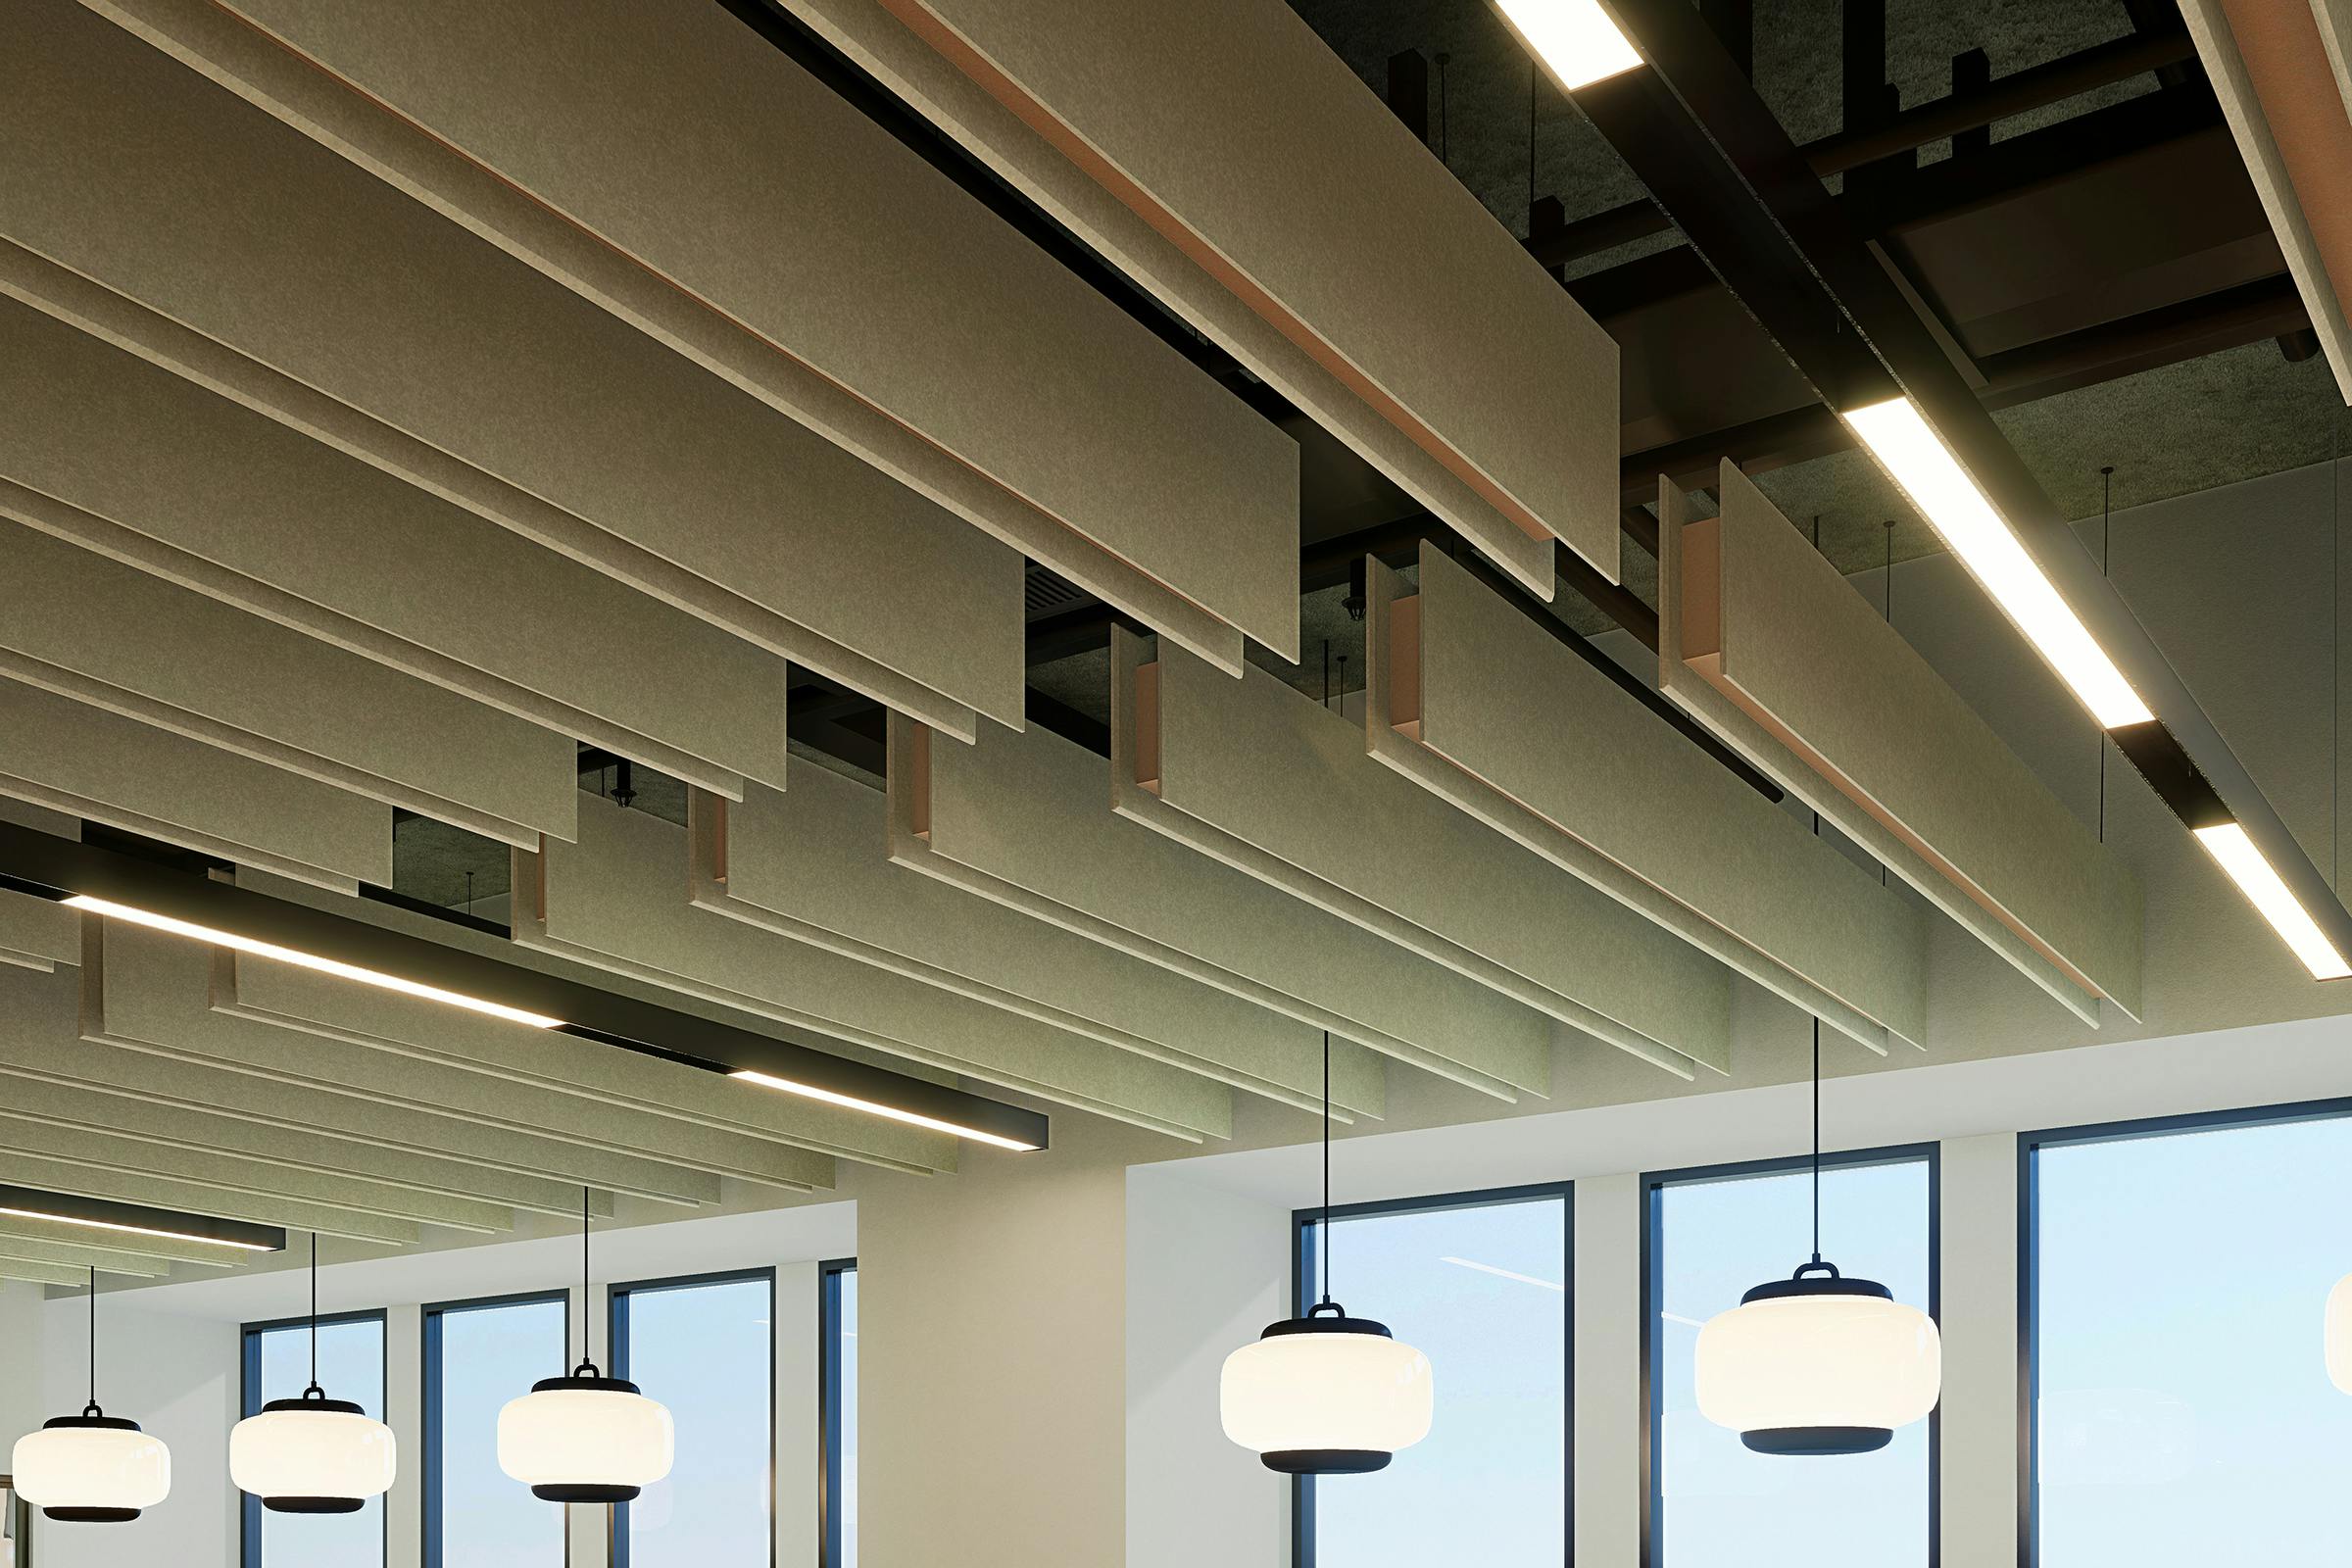 Modern office space with stylish hanging pendant lamps and sleek, baffle-layered panel ceiling design featuring recessed lighting for improved sound quality.